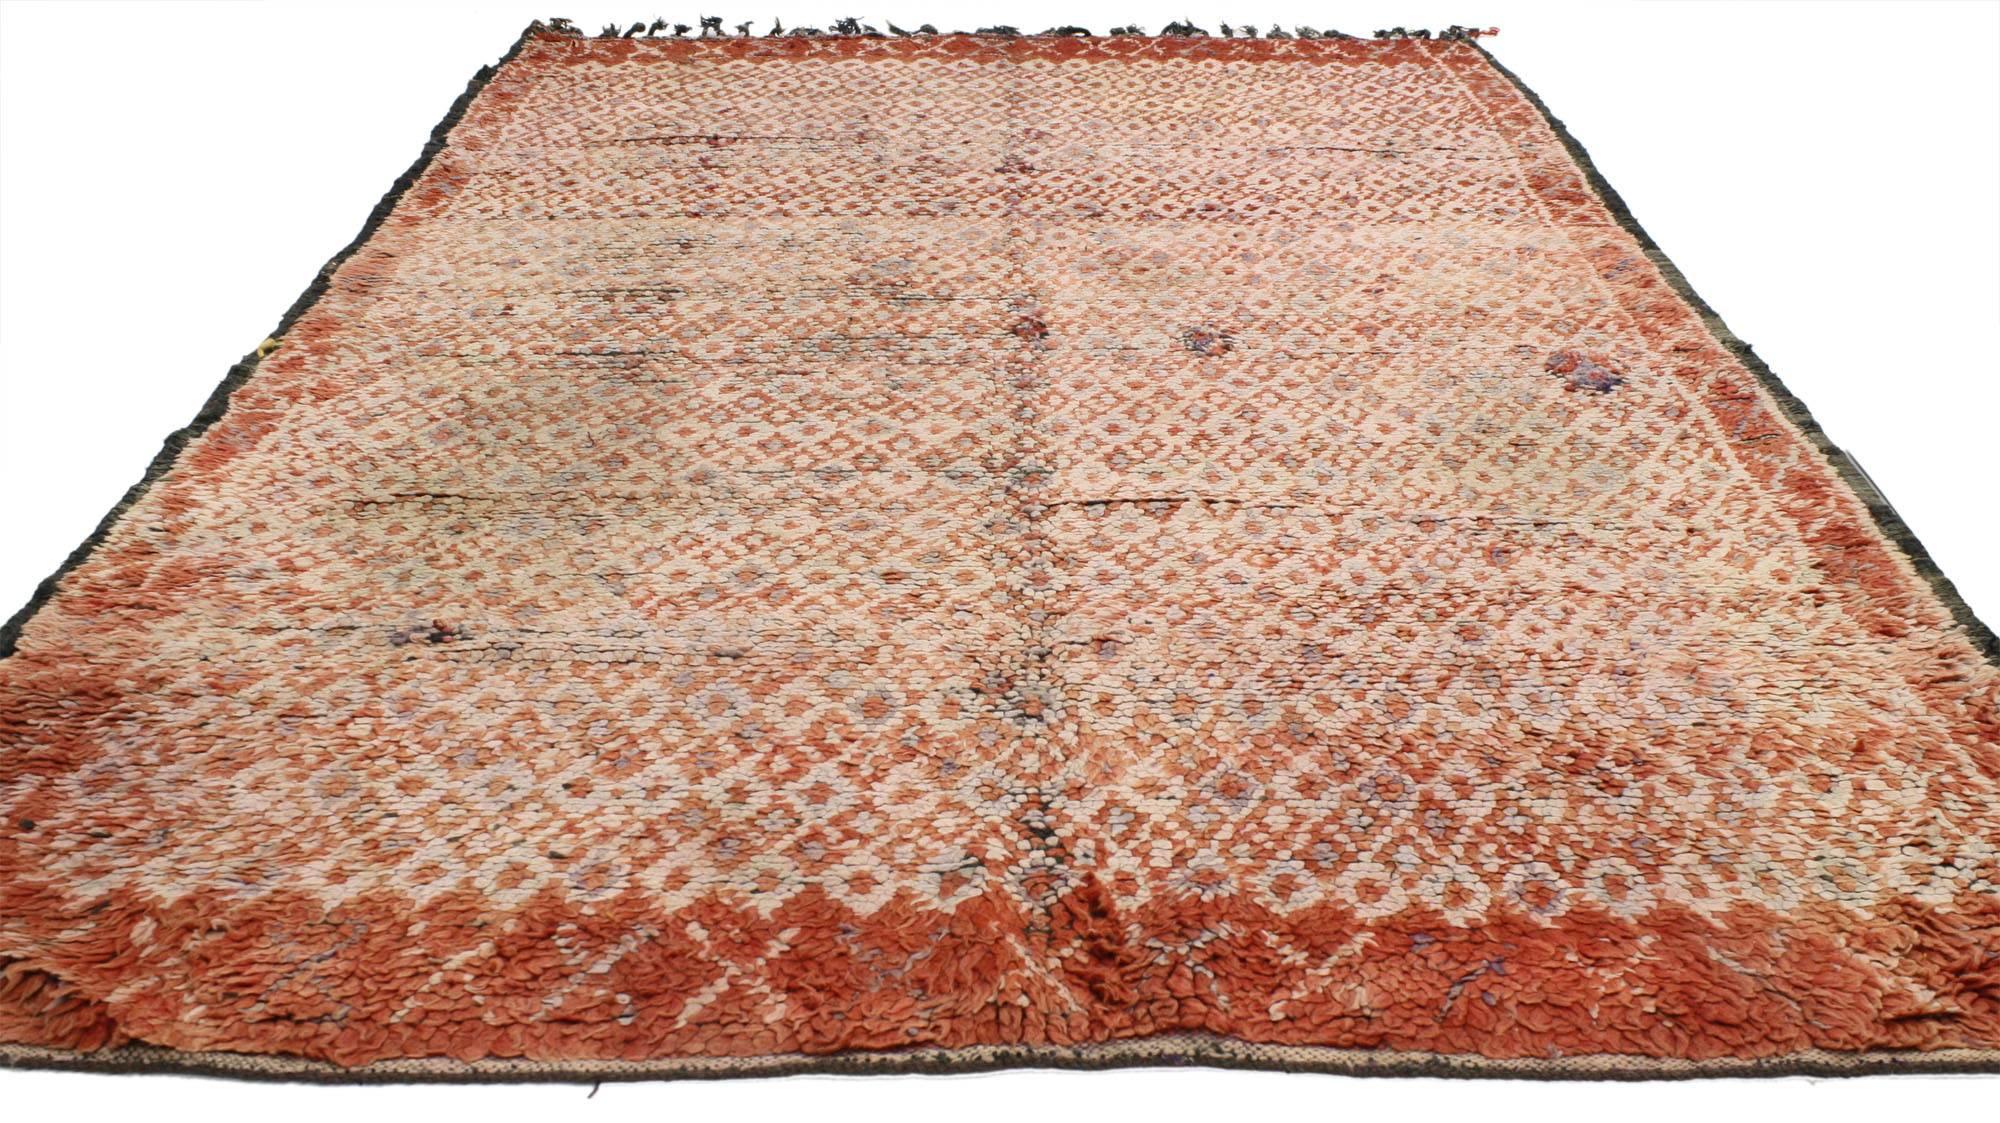 20612 vintage Berber Moroccan rug with tribal style. This vintage Berber Moroccan rug is colored with the power of crimson and umber, colors which denote the rich culture of the ancient Berbers. Creamy beige overlays the centre of the rug, forming